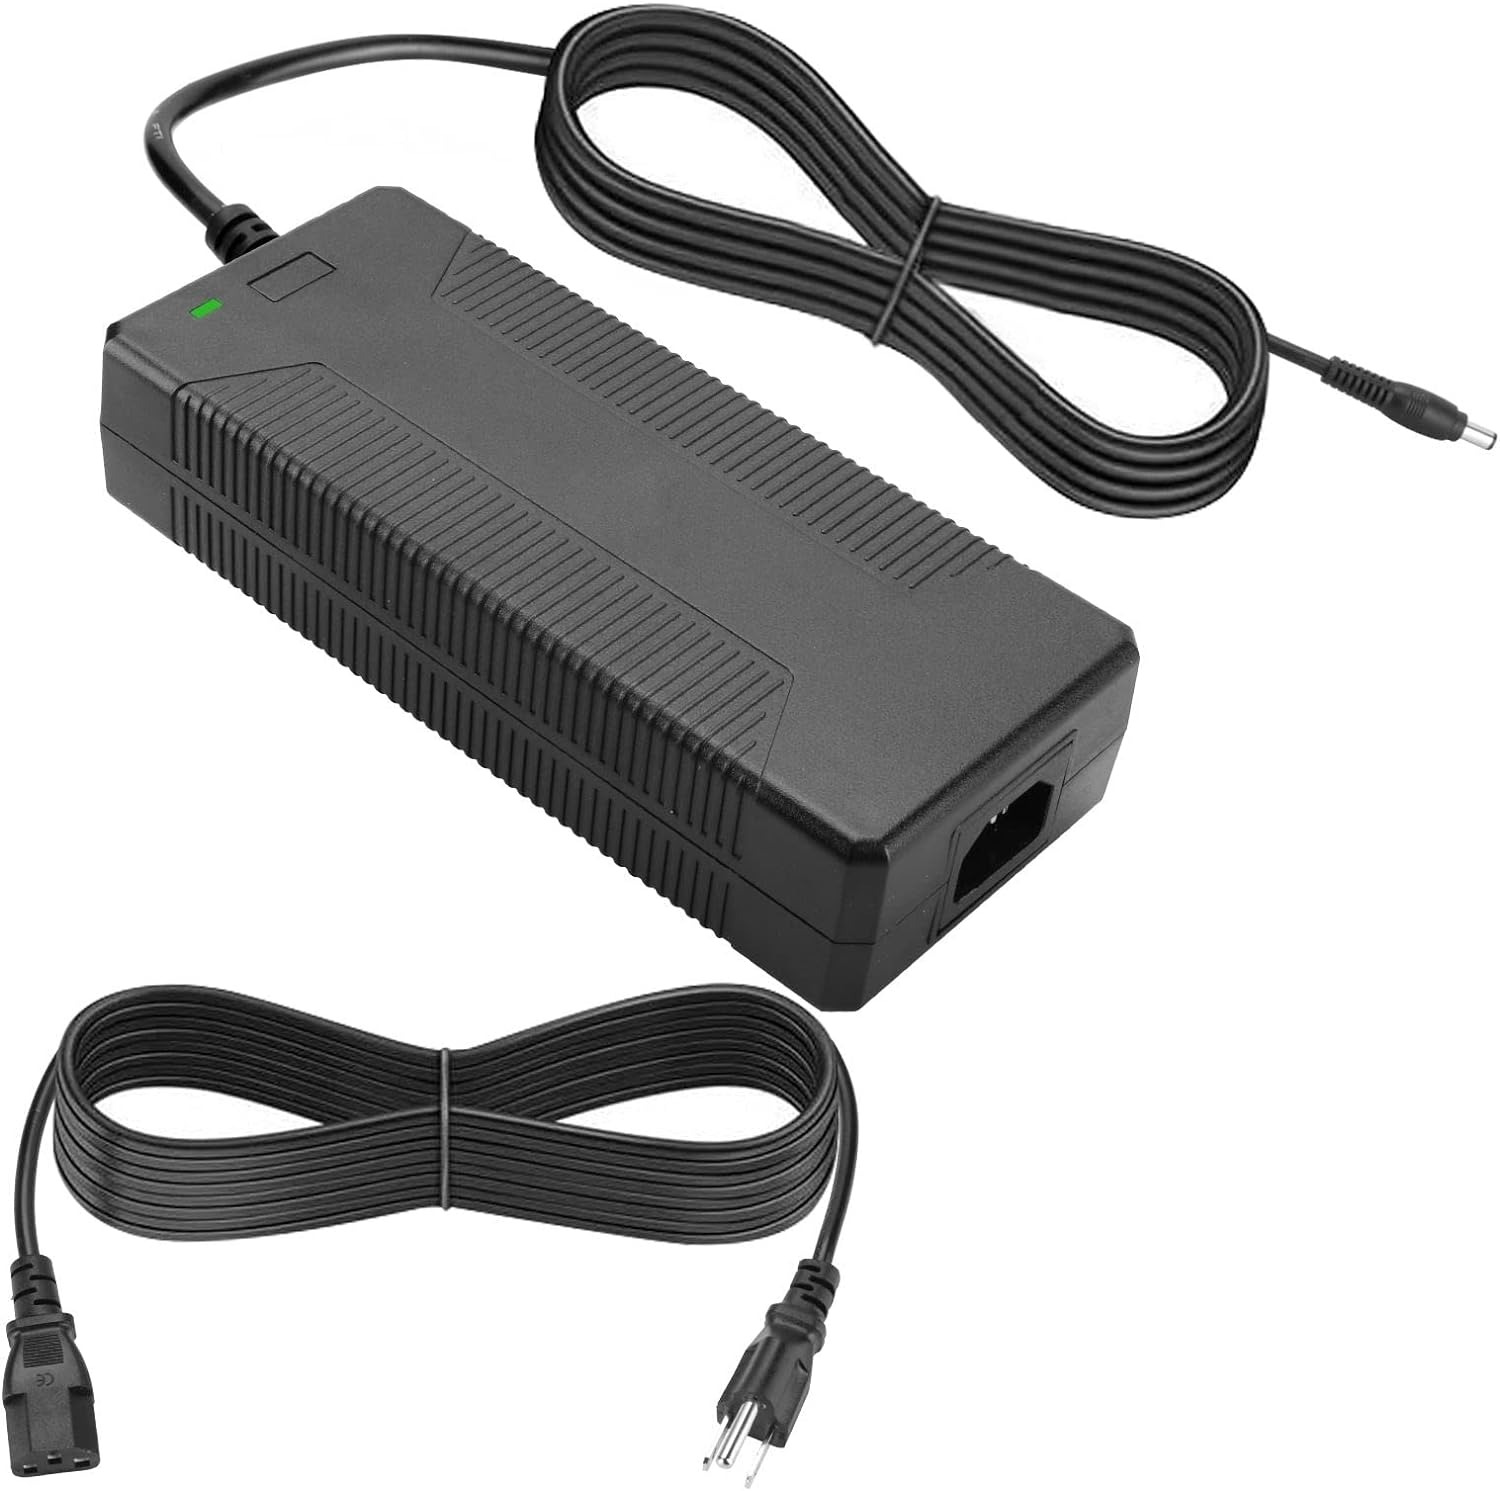 For Drobo Power Supply Is Compatible with the Drobos, 5D, 5Dt, 5N2, 5C, and 5D3